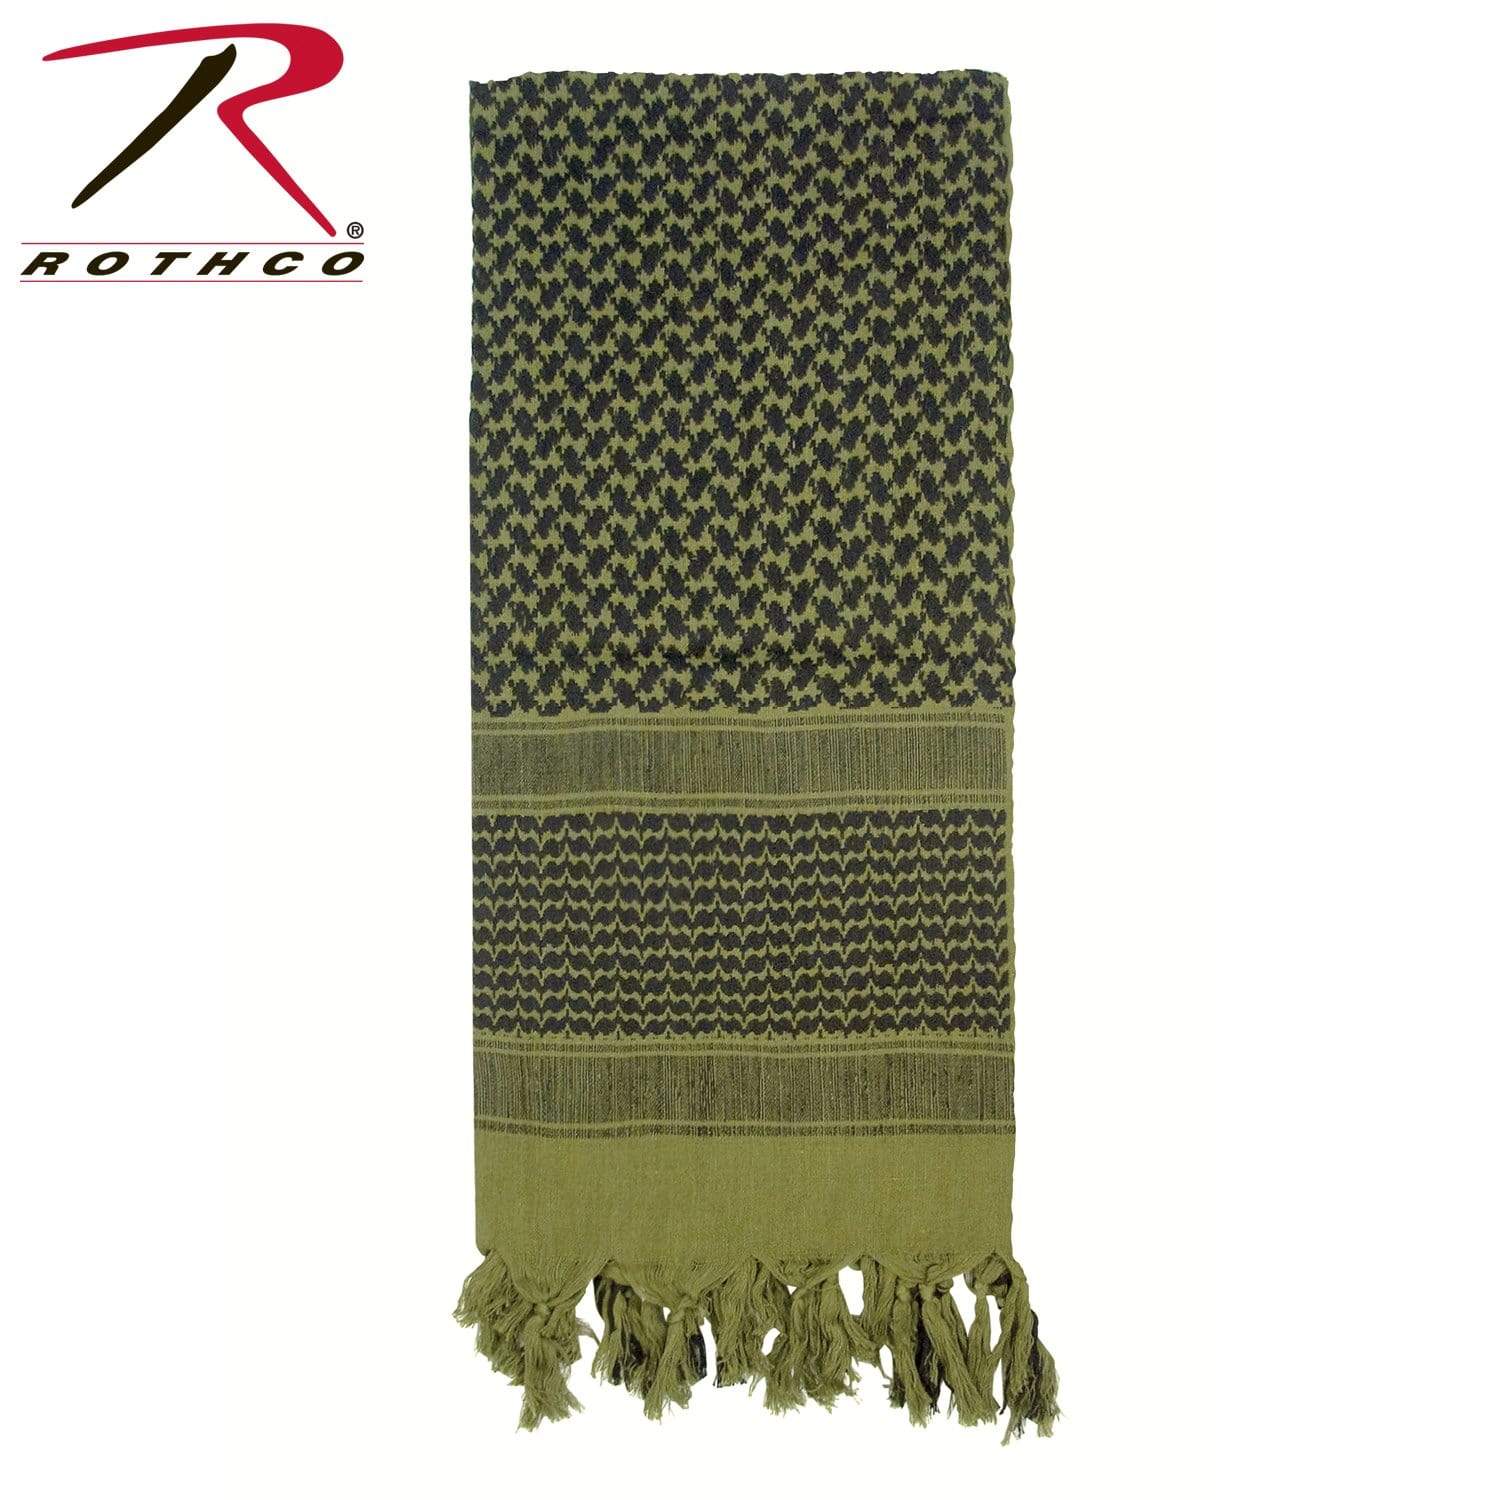 Rothco Shemagh Tactical Desert Keffiyeh Scarf - Olive Drab - Eminent Paintball And Airsoft